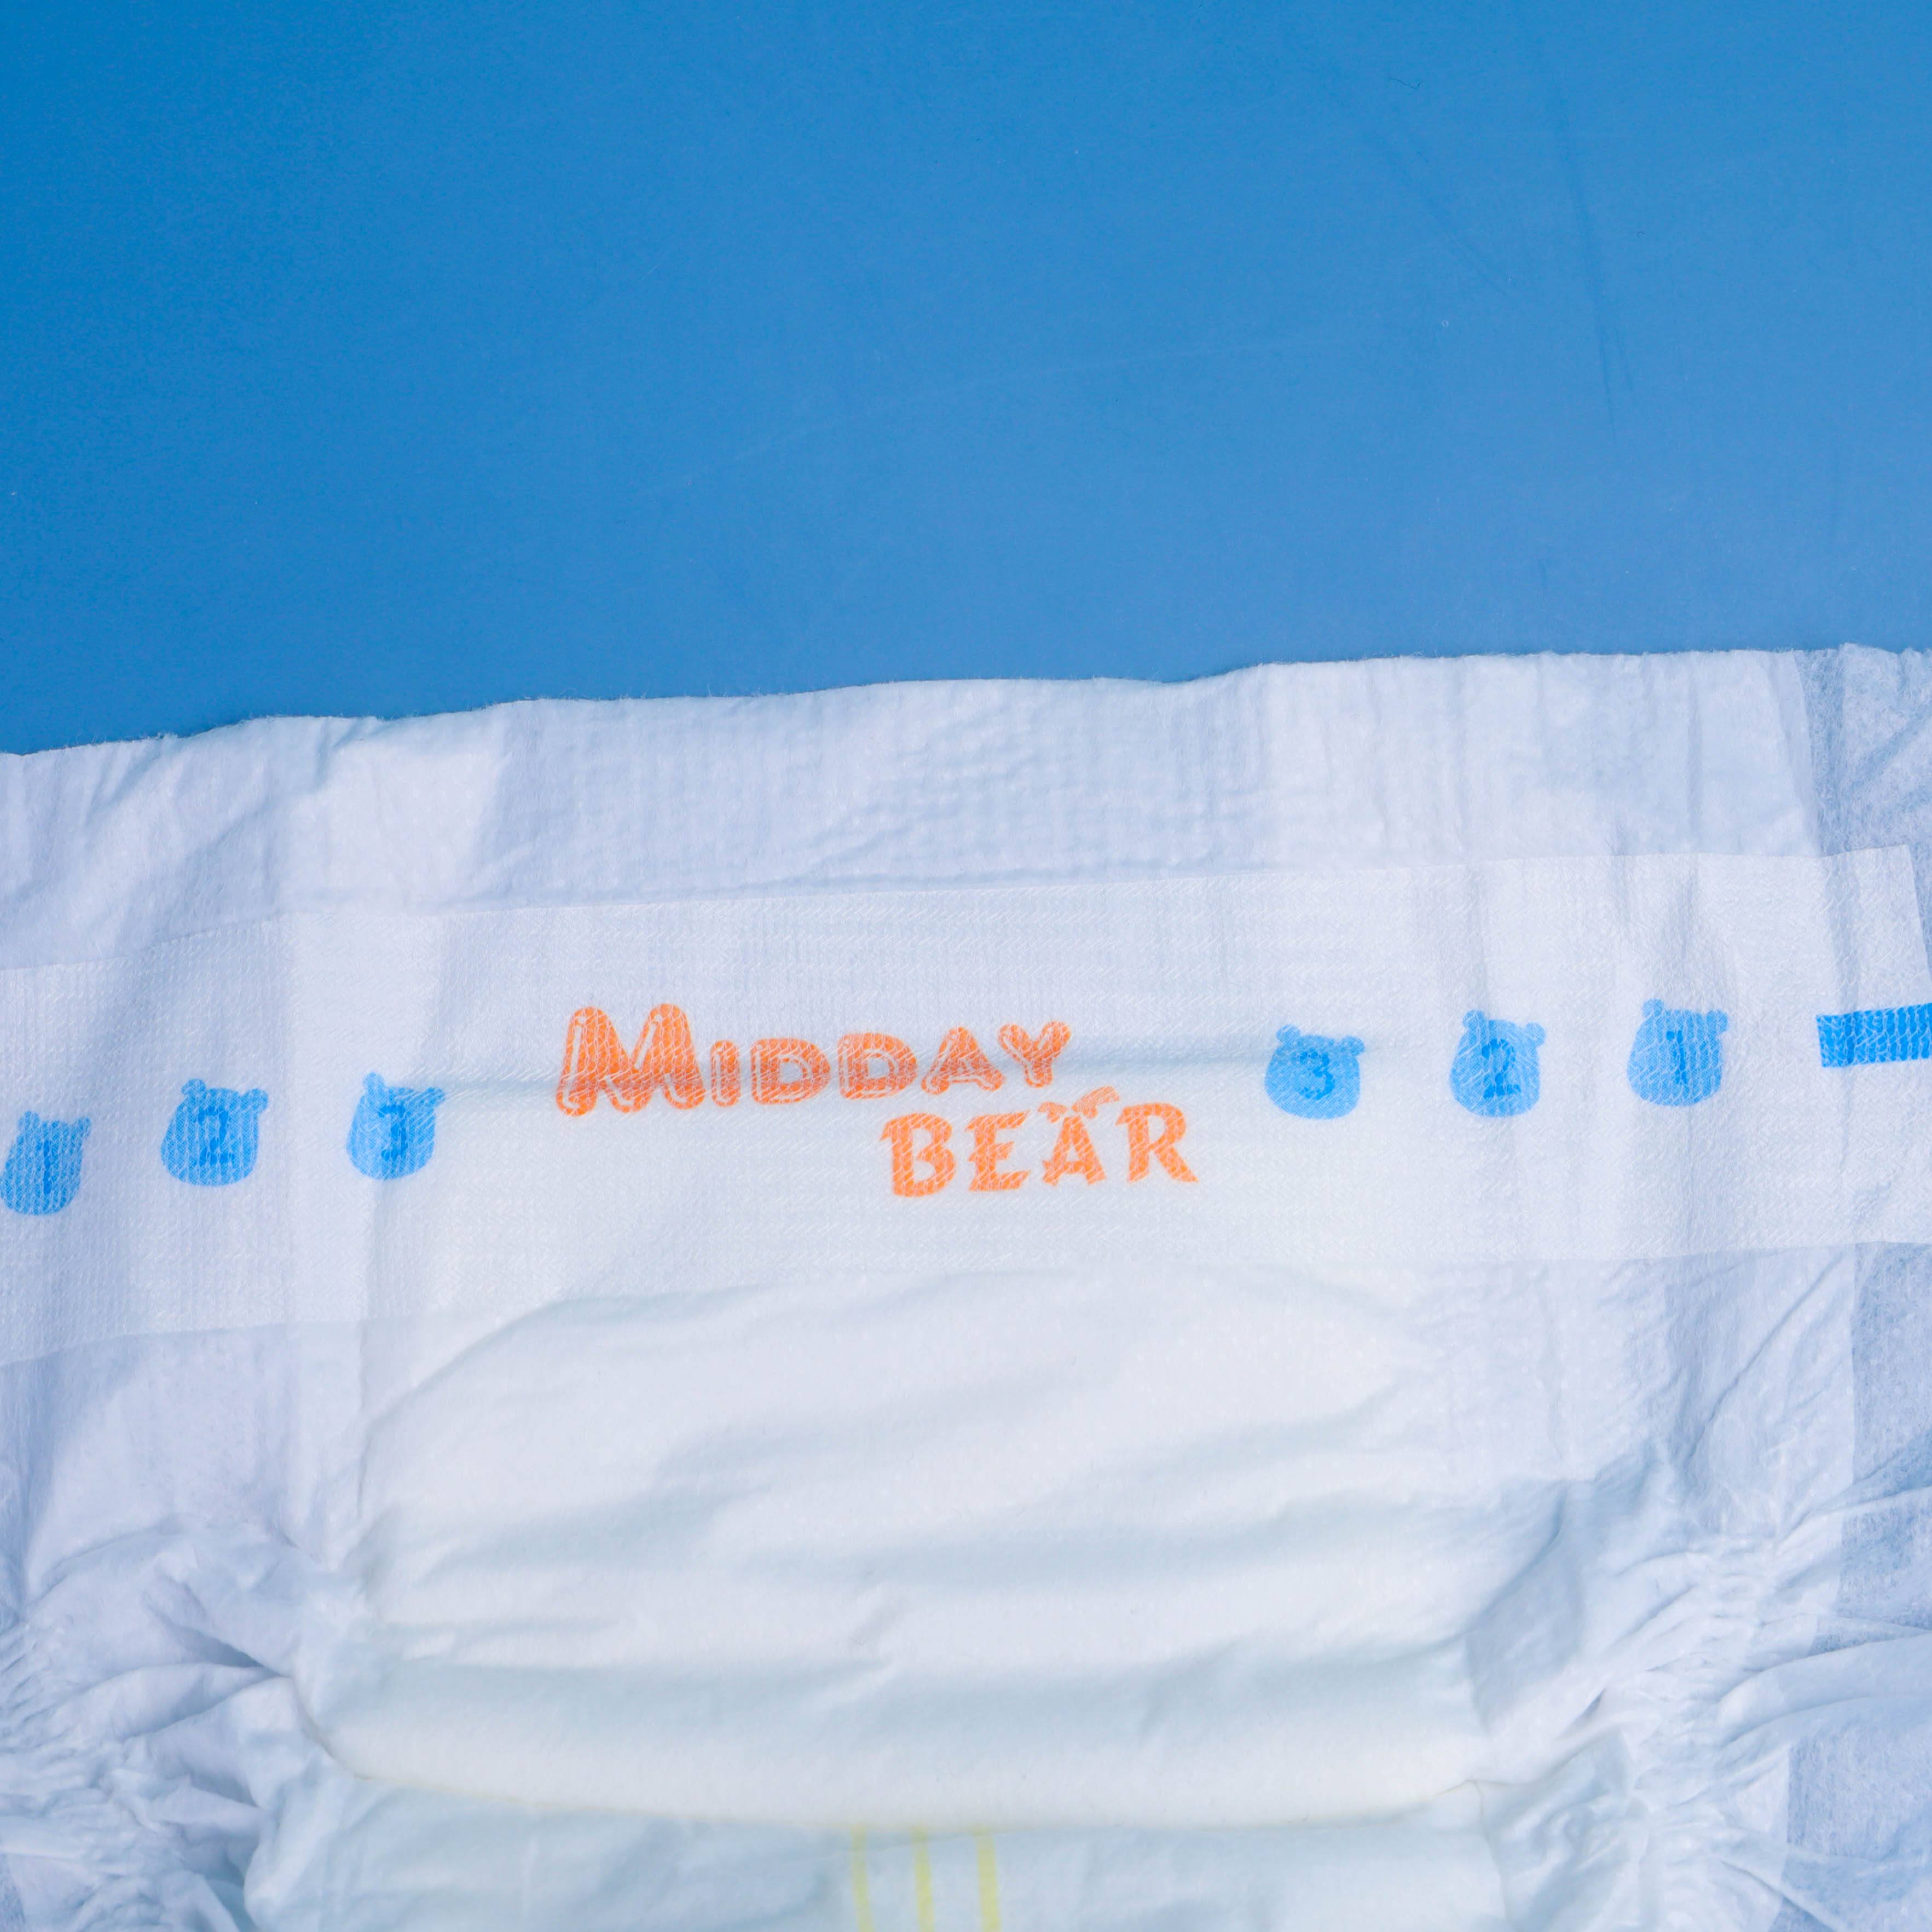 Midday Bear Adult diaper company